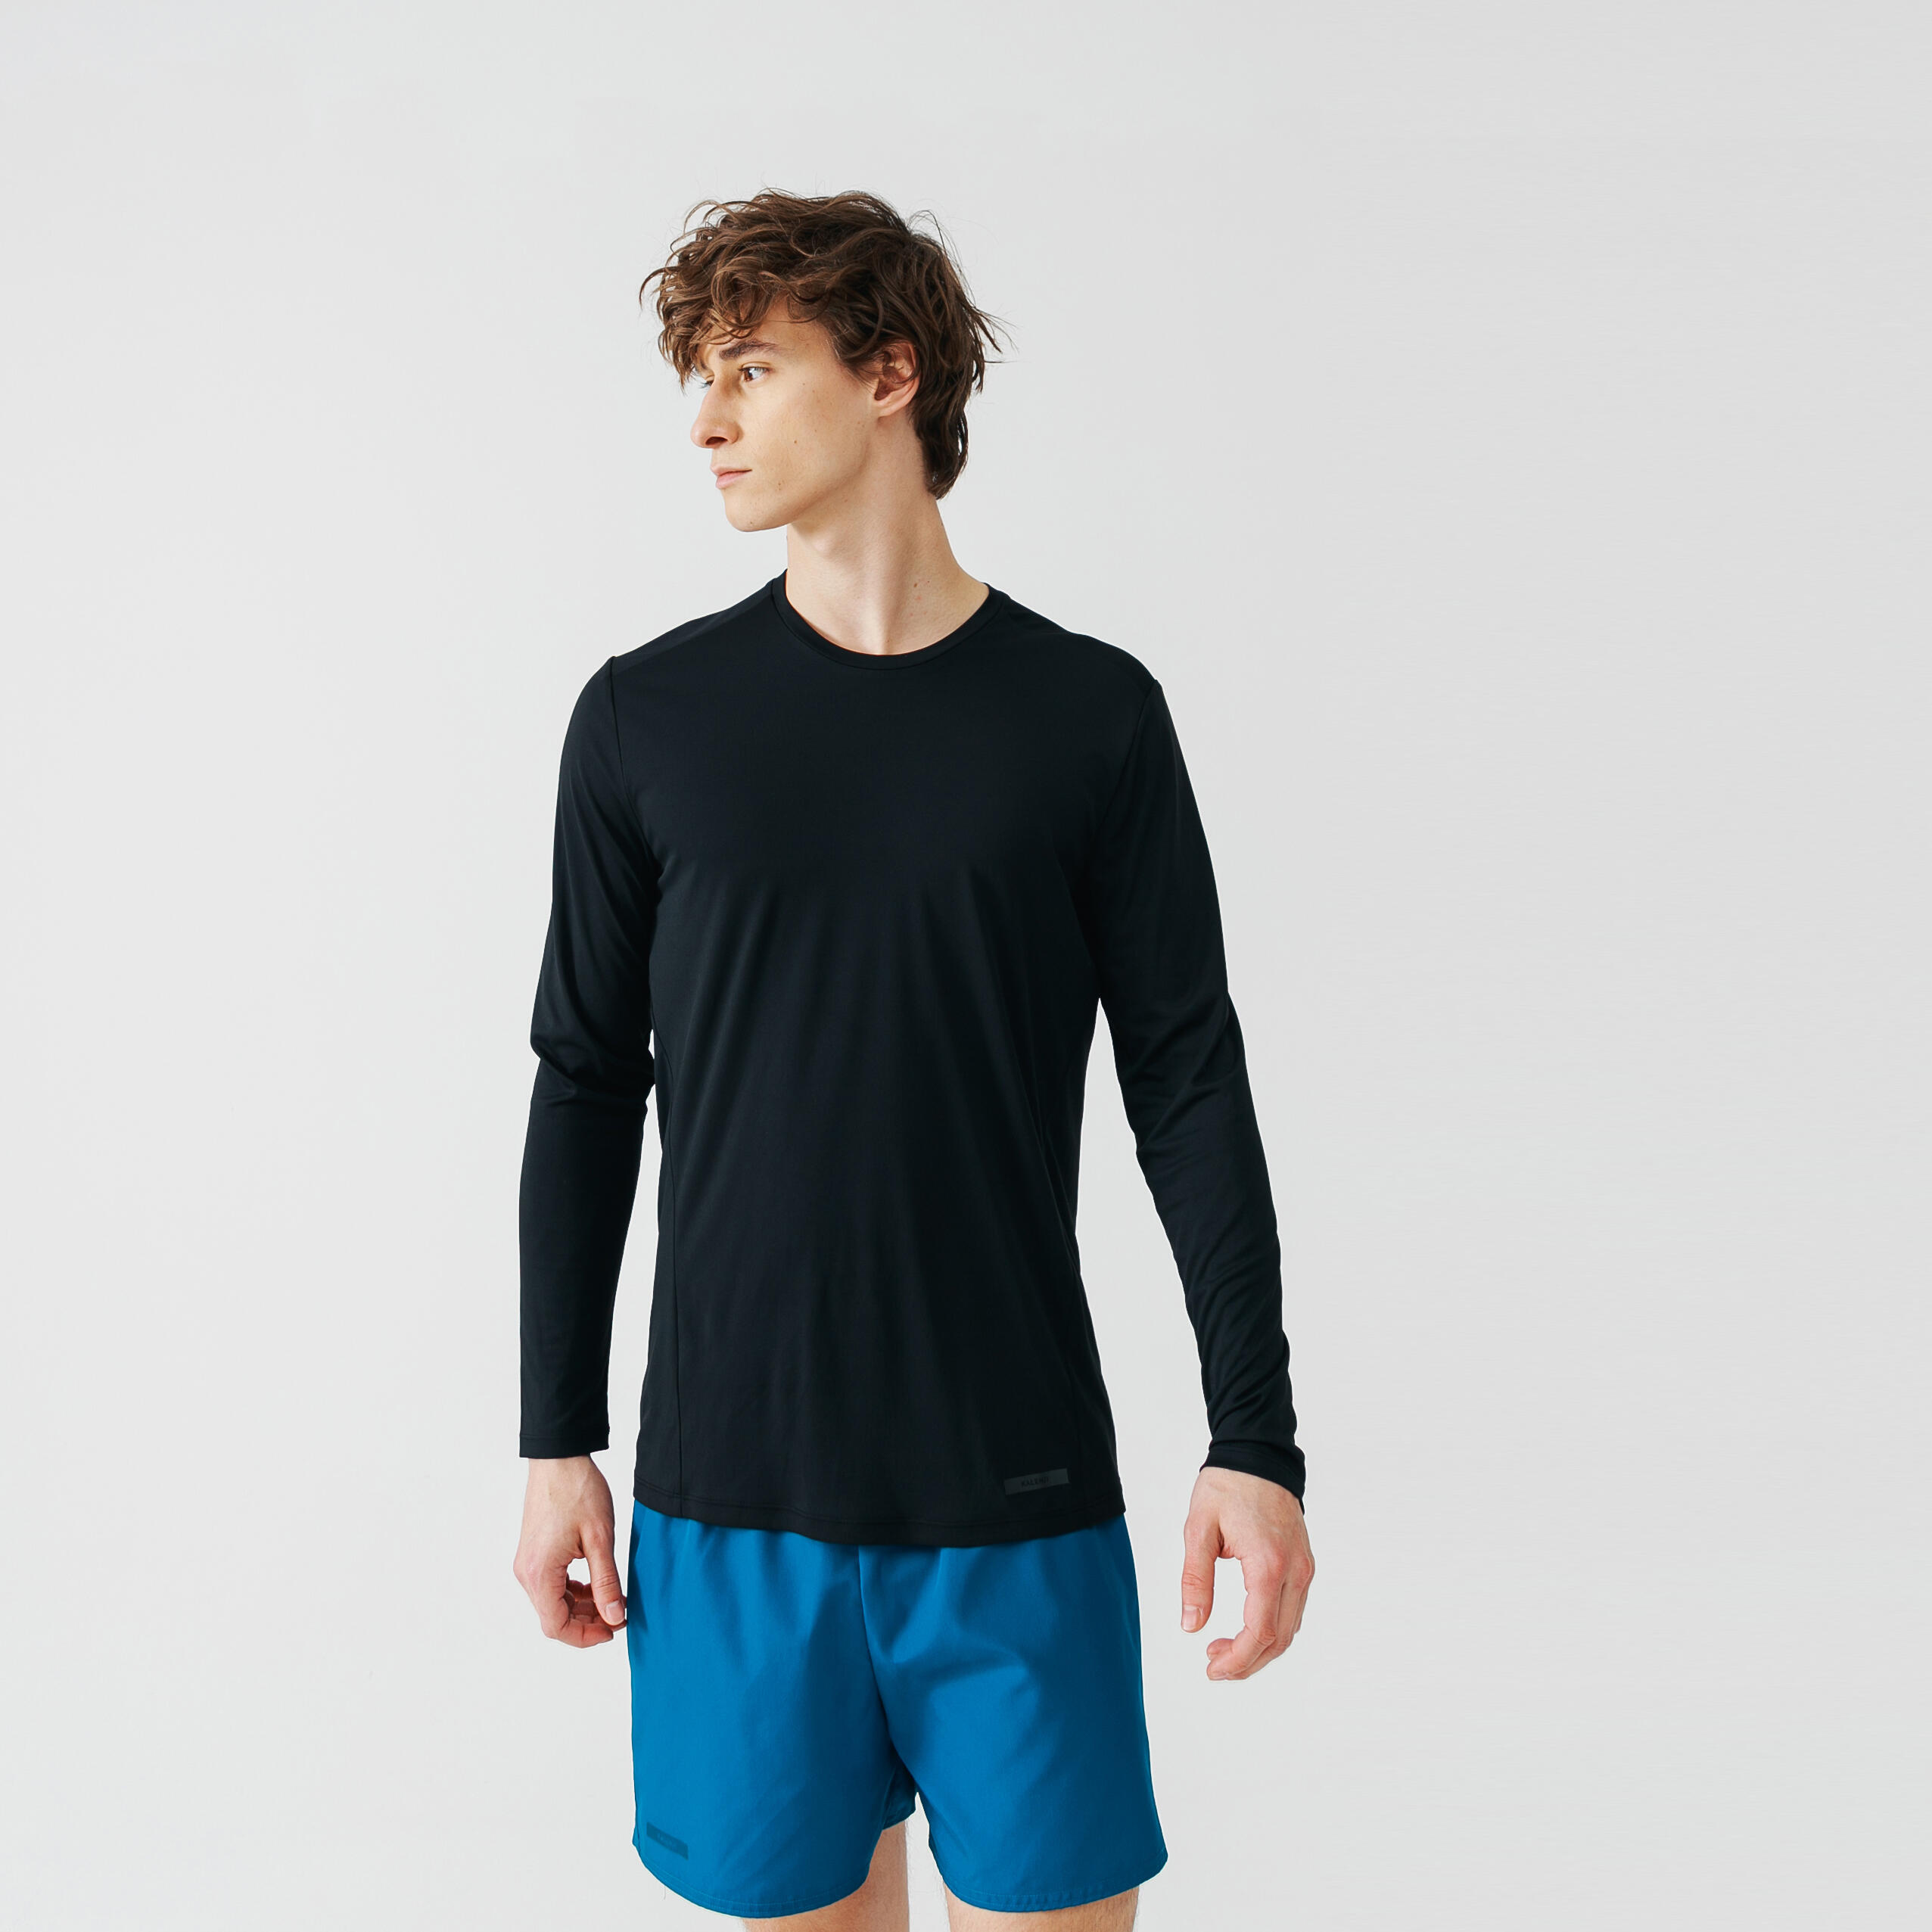 Buy T Shirt Running Manches Longues Respirant Homme Sun Protect Noir Online